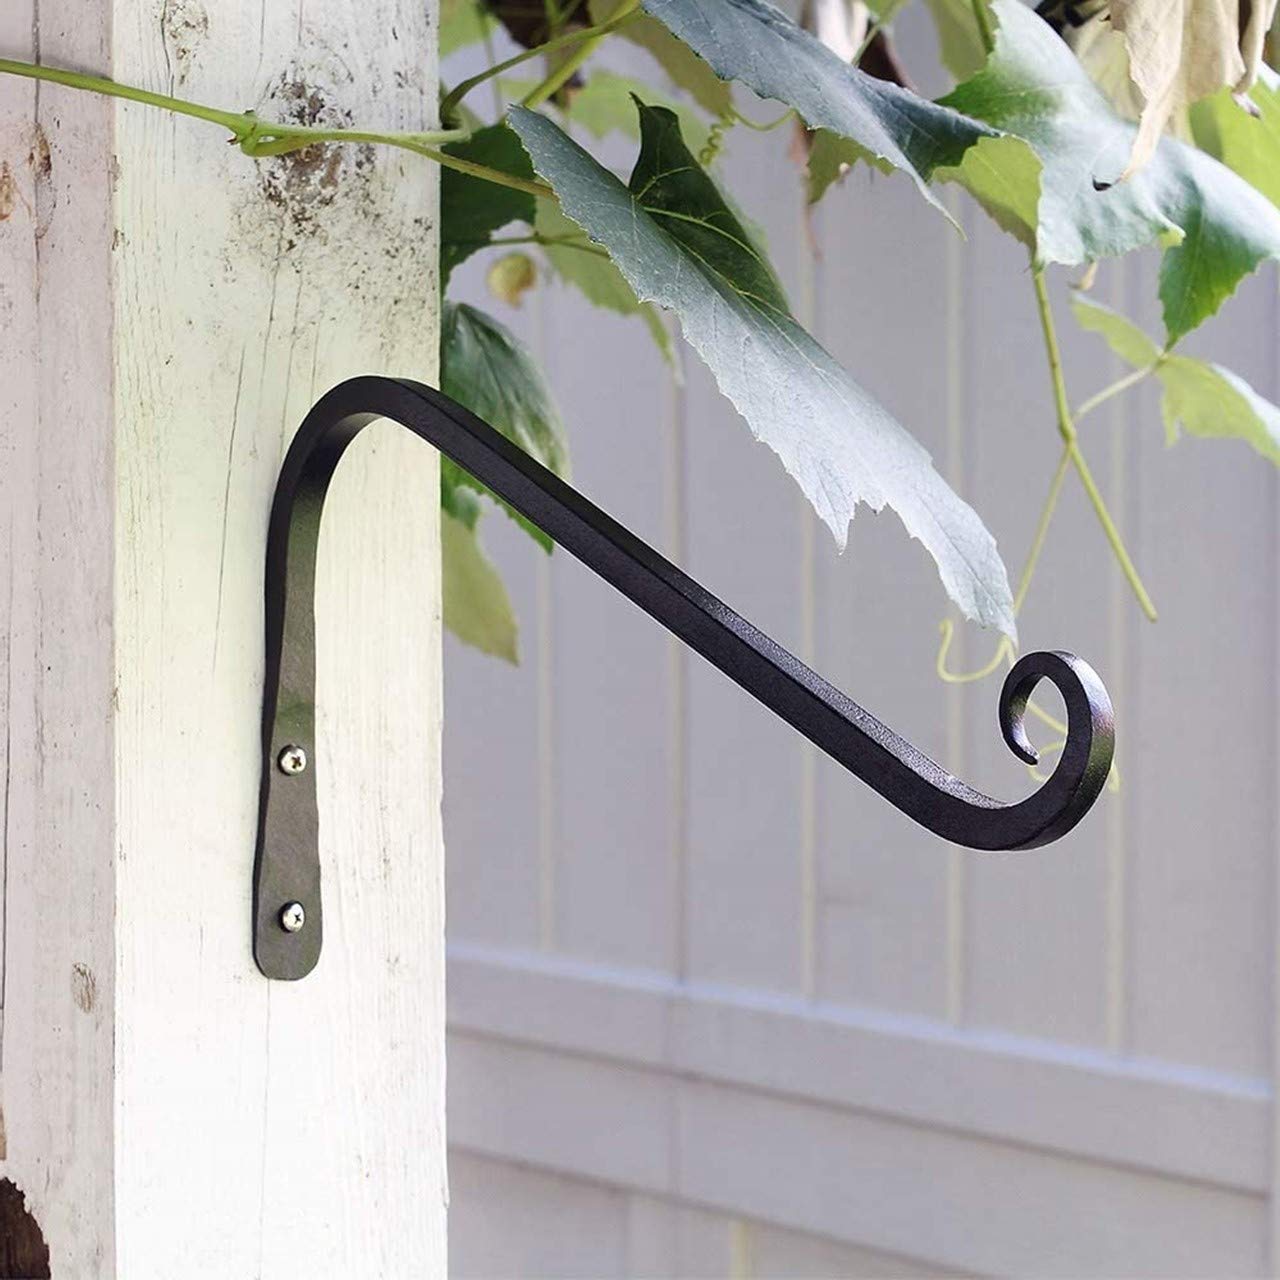 Wall Hook Hanging Plant Bracket - Metal Wall Plant Hooks for Home Decor  Plant Hangers for Bird Feeders, Planters, Flower Baskets, Wind Indoor  Outdoor